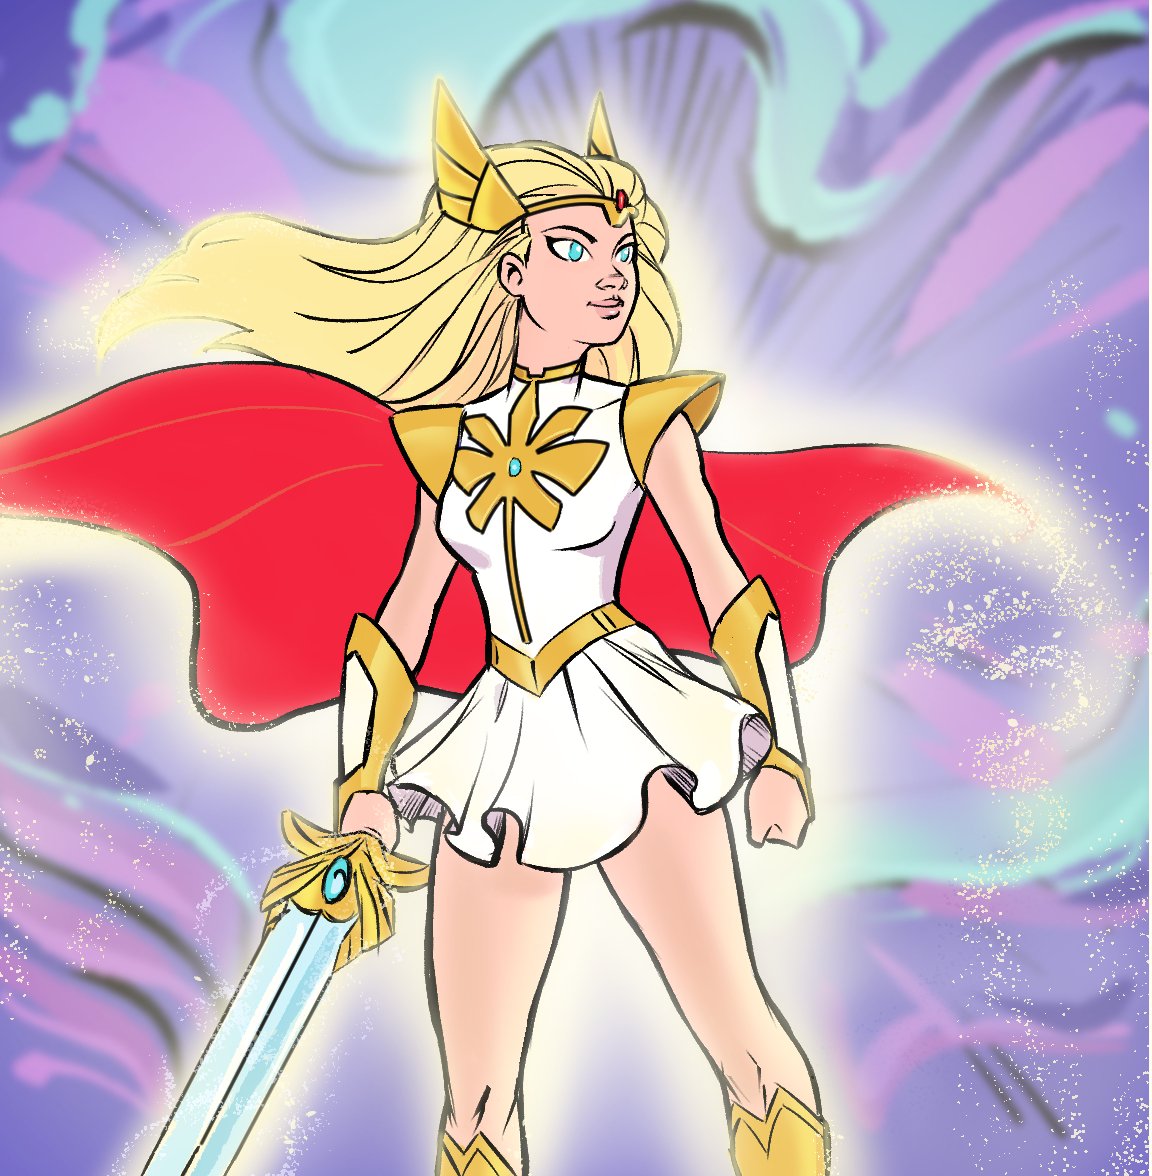 She-Ra. Just a quick little re-draw today. Kept the same basic design just softened her up a little. #SheRa #80s #PrincessOfPower